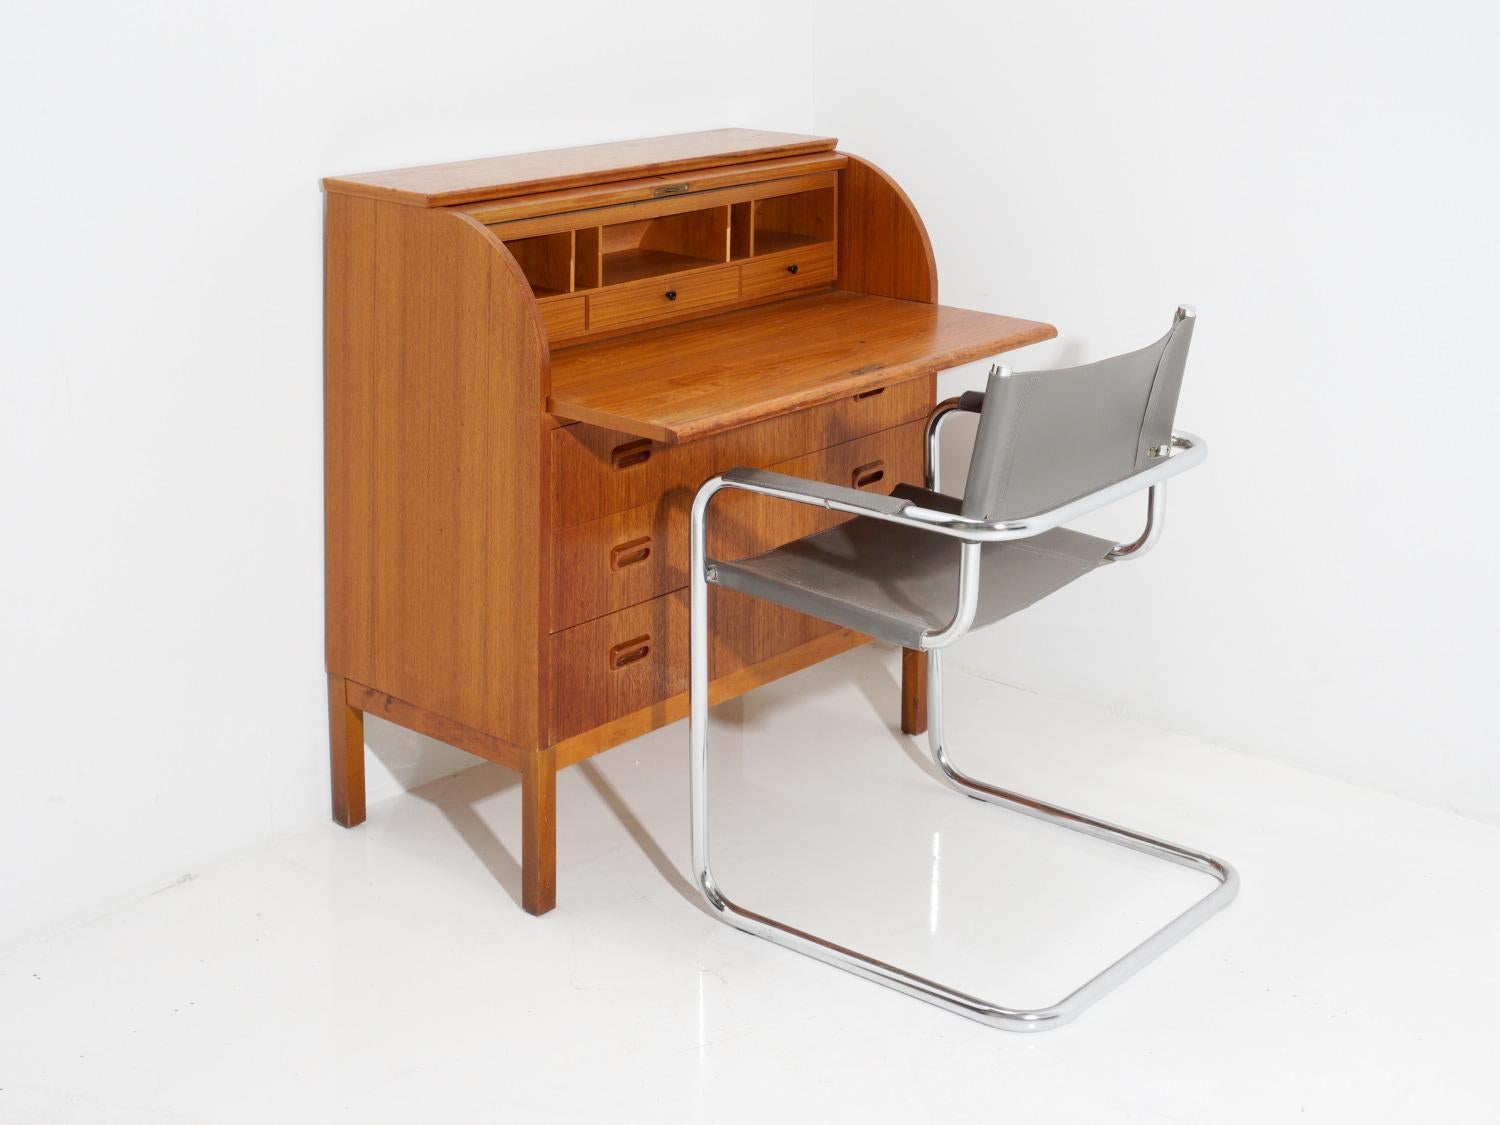 If you want to feel like a classy, old-school boss while working from home in your sweatpants, a vintage teak roll top secretary desk is the way to go. You can even pretend you're in a 1920s detective movie and dramatically roll up the top whenever